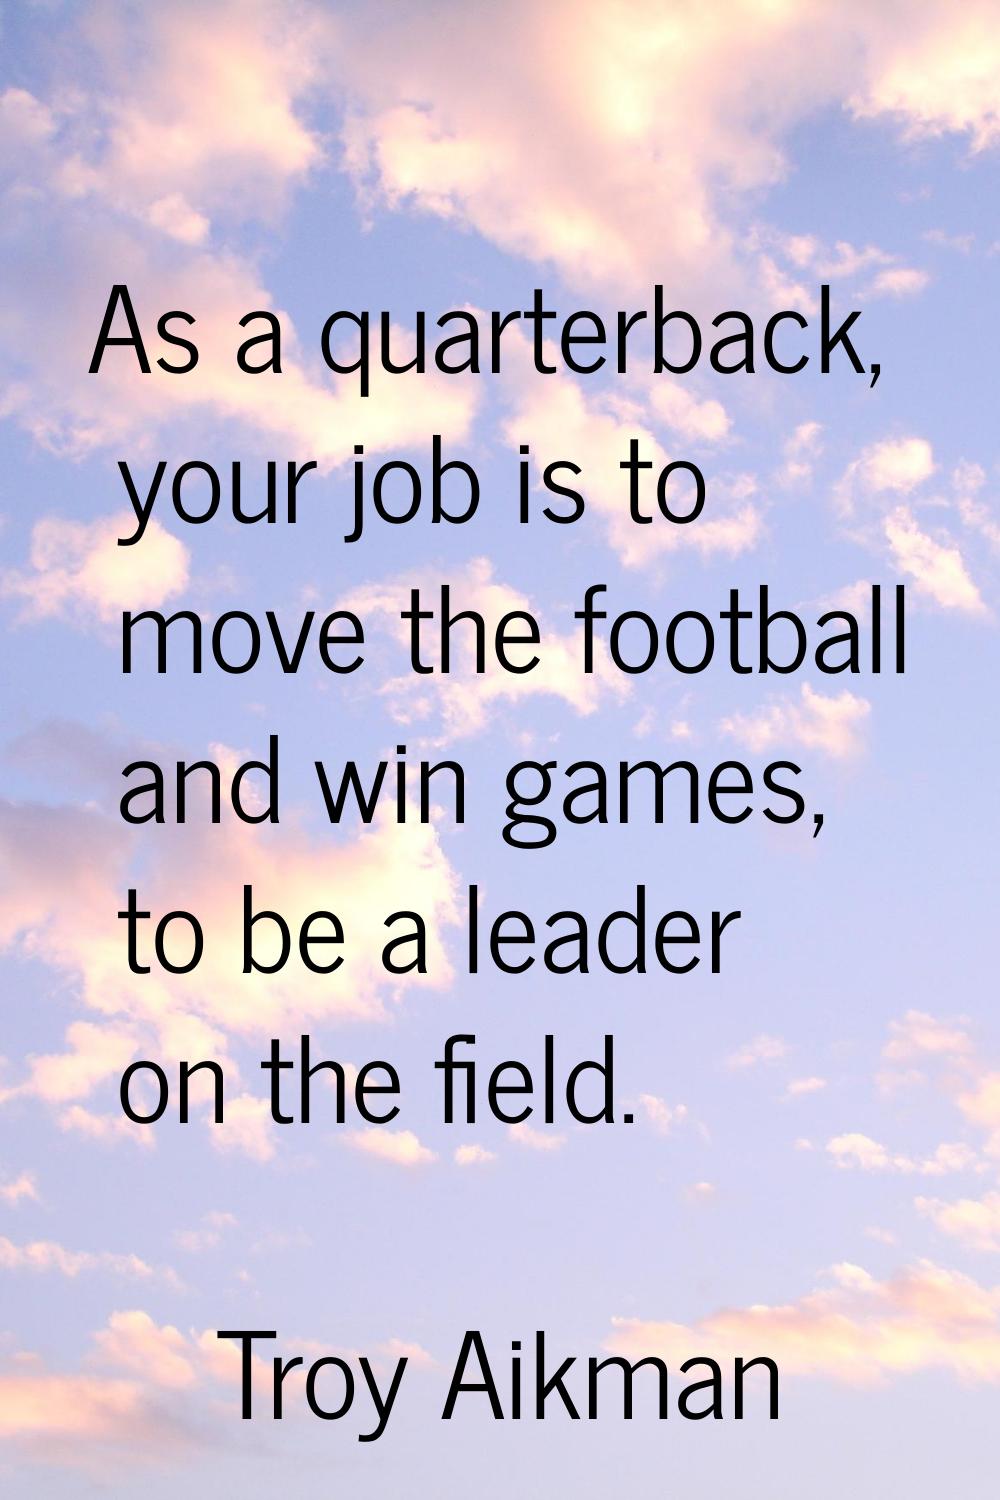 As a quarterback, your job is to move the football and win games, to be a leader on the field.